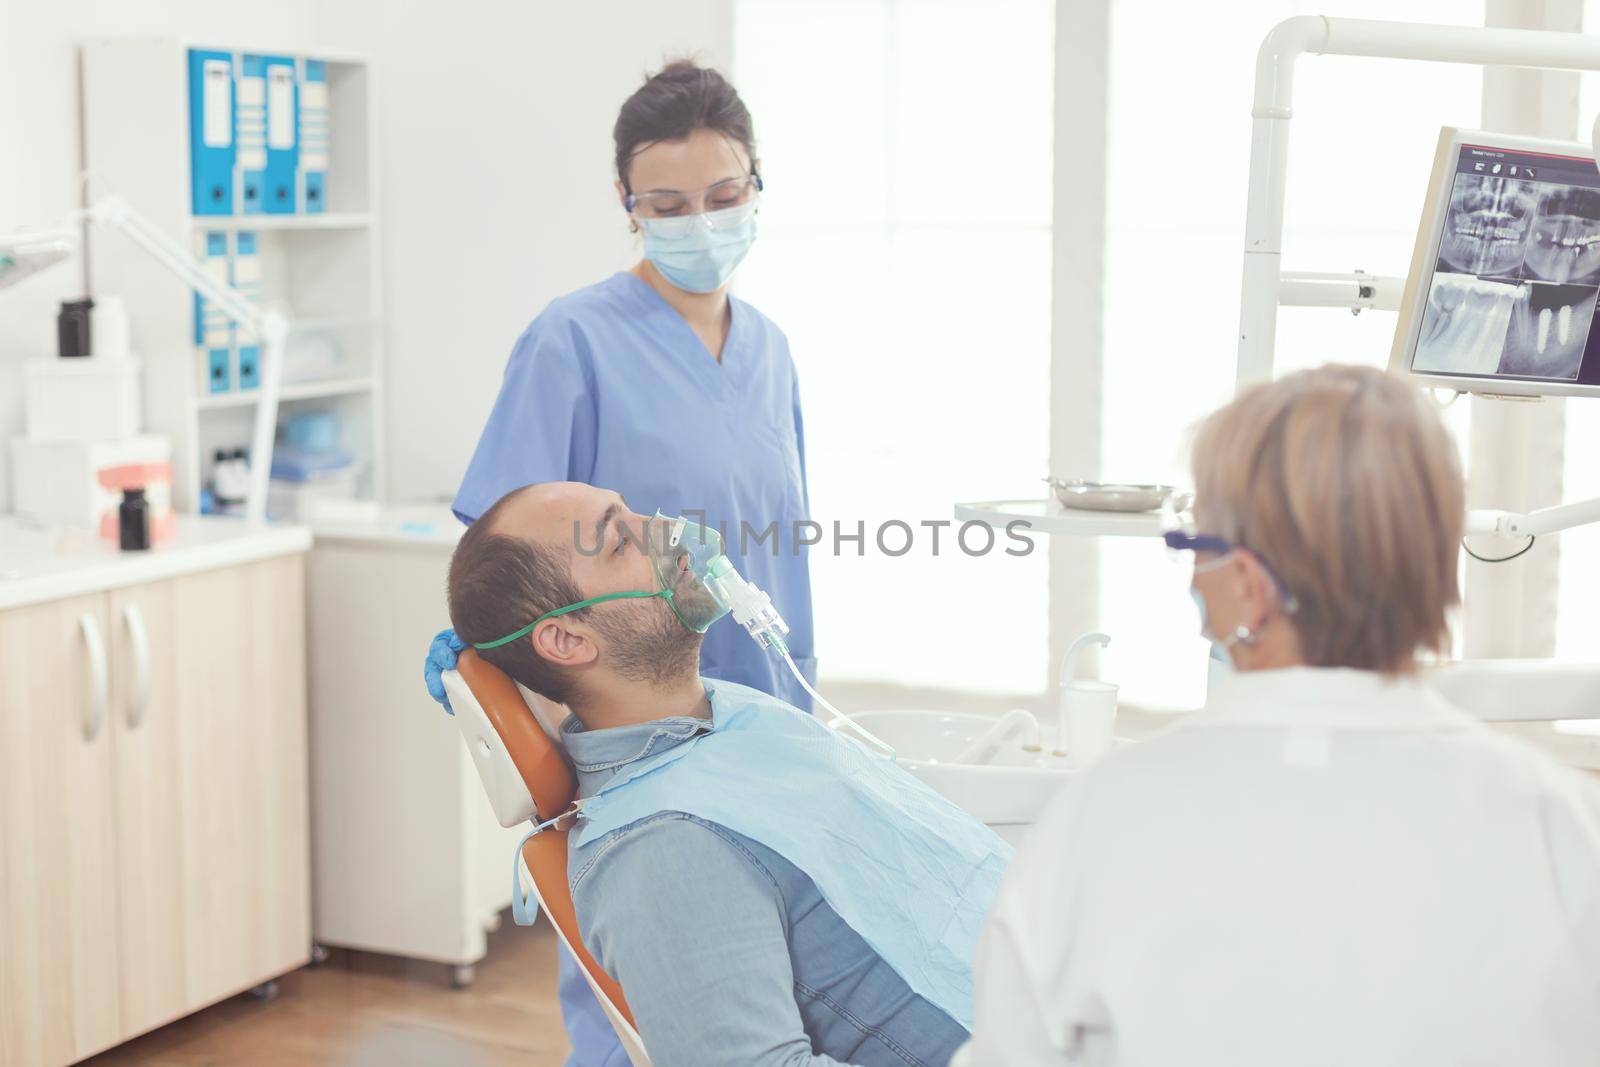 Sick patient sitting on dental chair wearing oxigen mask during stomatology appointment. Dentists hospital team examining tooth while working in dentistry cabinet preparing healthcare treatment